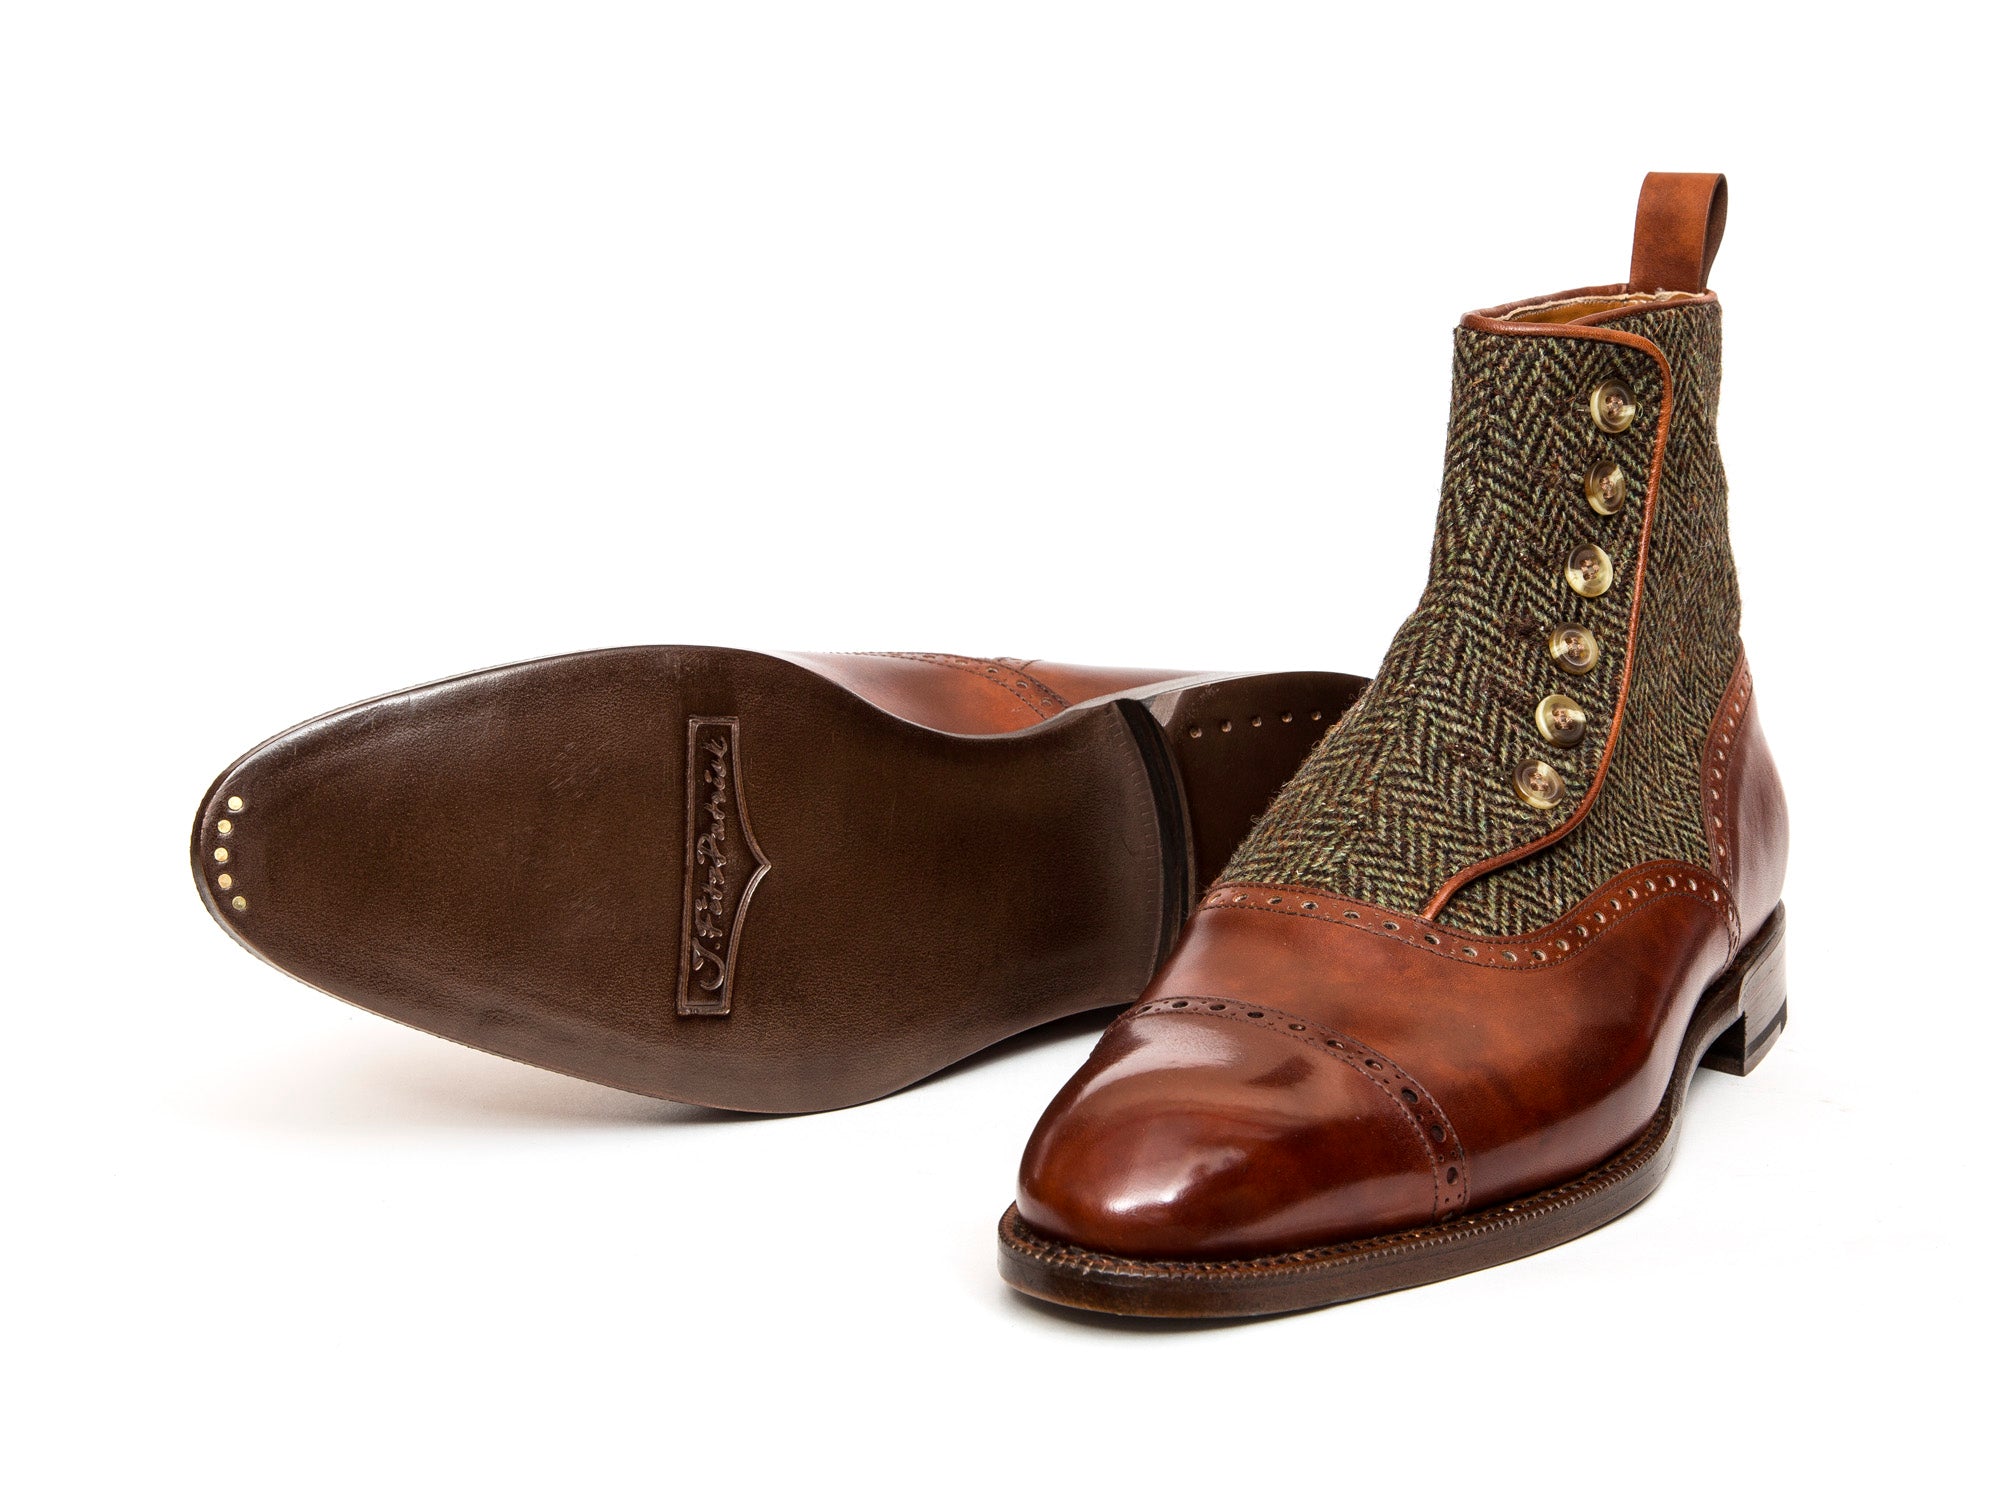 Puyallup - MTO - Gold Museum Calf / Forest Tweed - NGT Last - Single Leather Sole